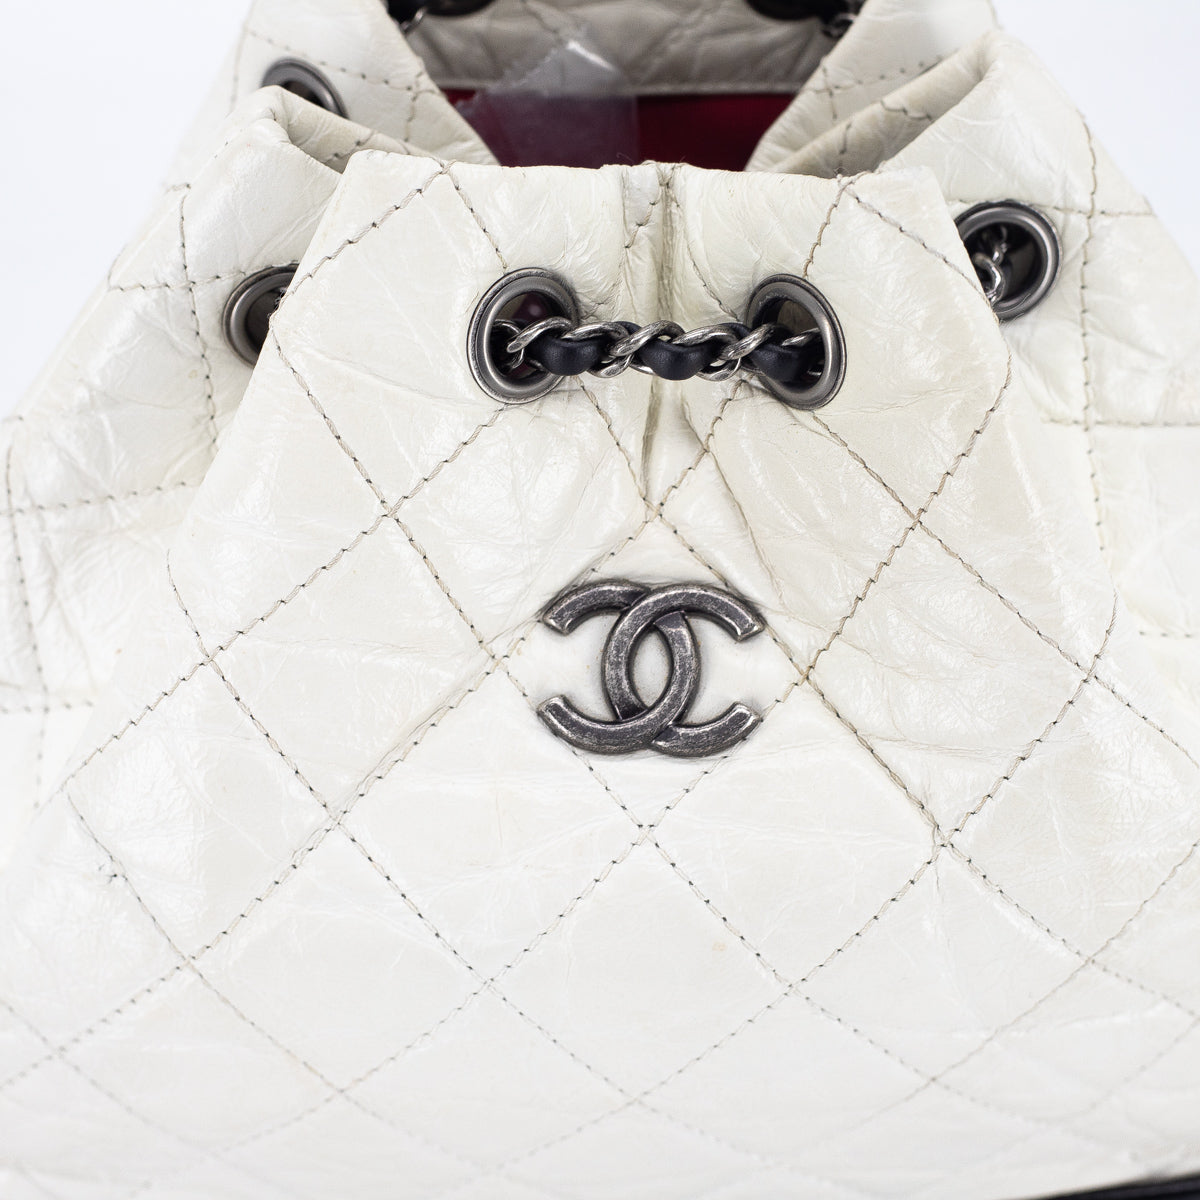 Chanel Gabrielle backpack – Beccas Bags